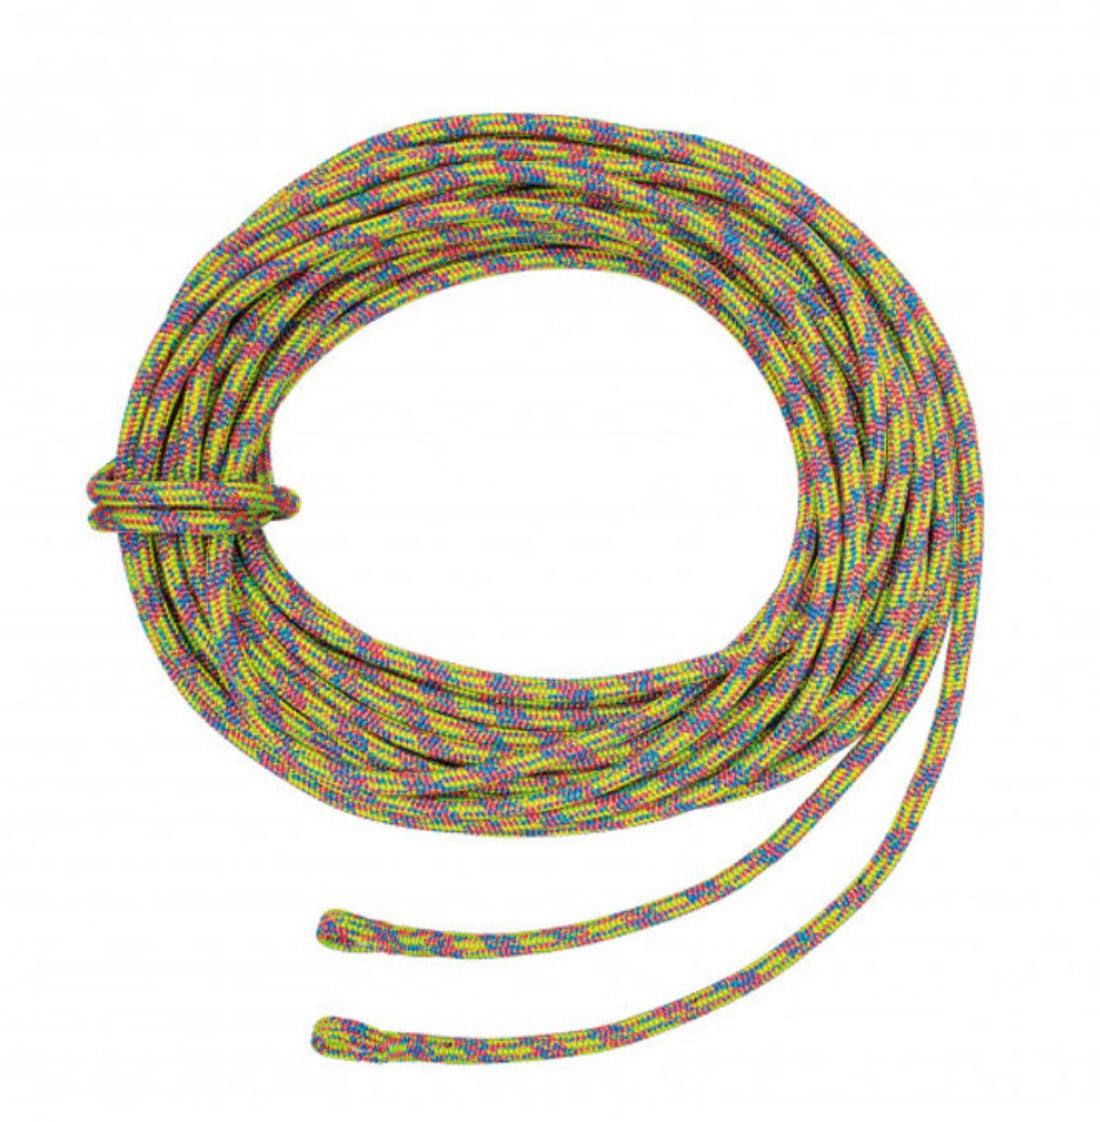 COURANT KALIMBA 11.9 MM 60 M - 1 SPLICE COURANT